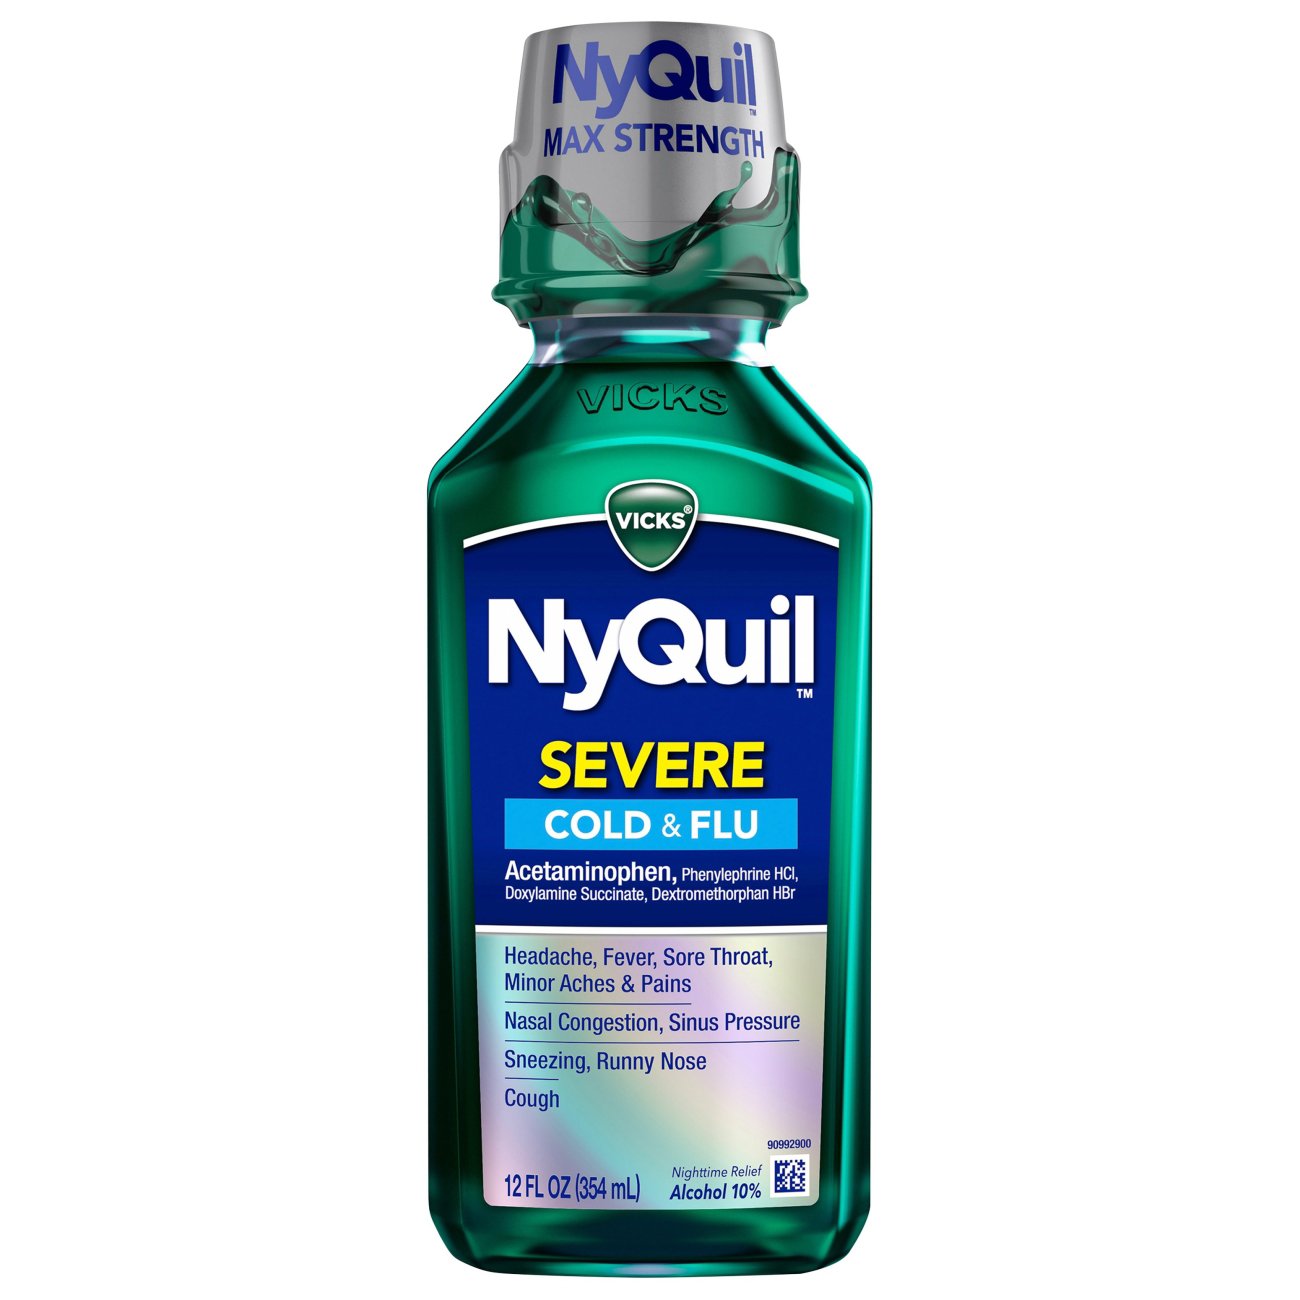 How Much Alcohol is in Nyquil?